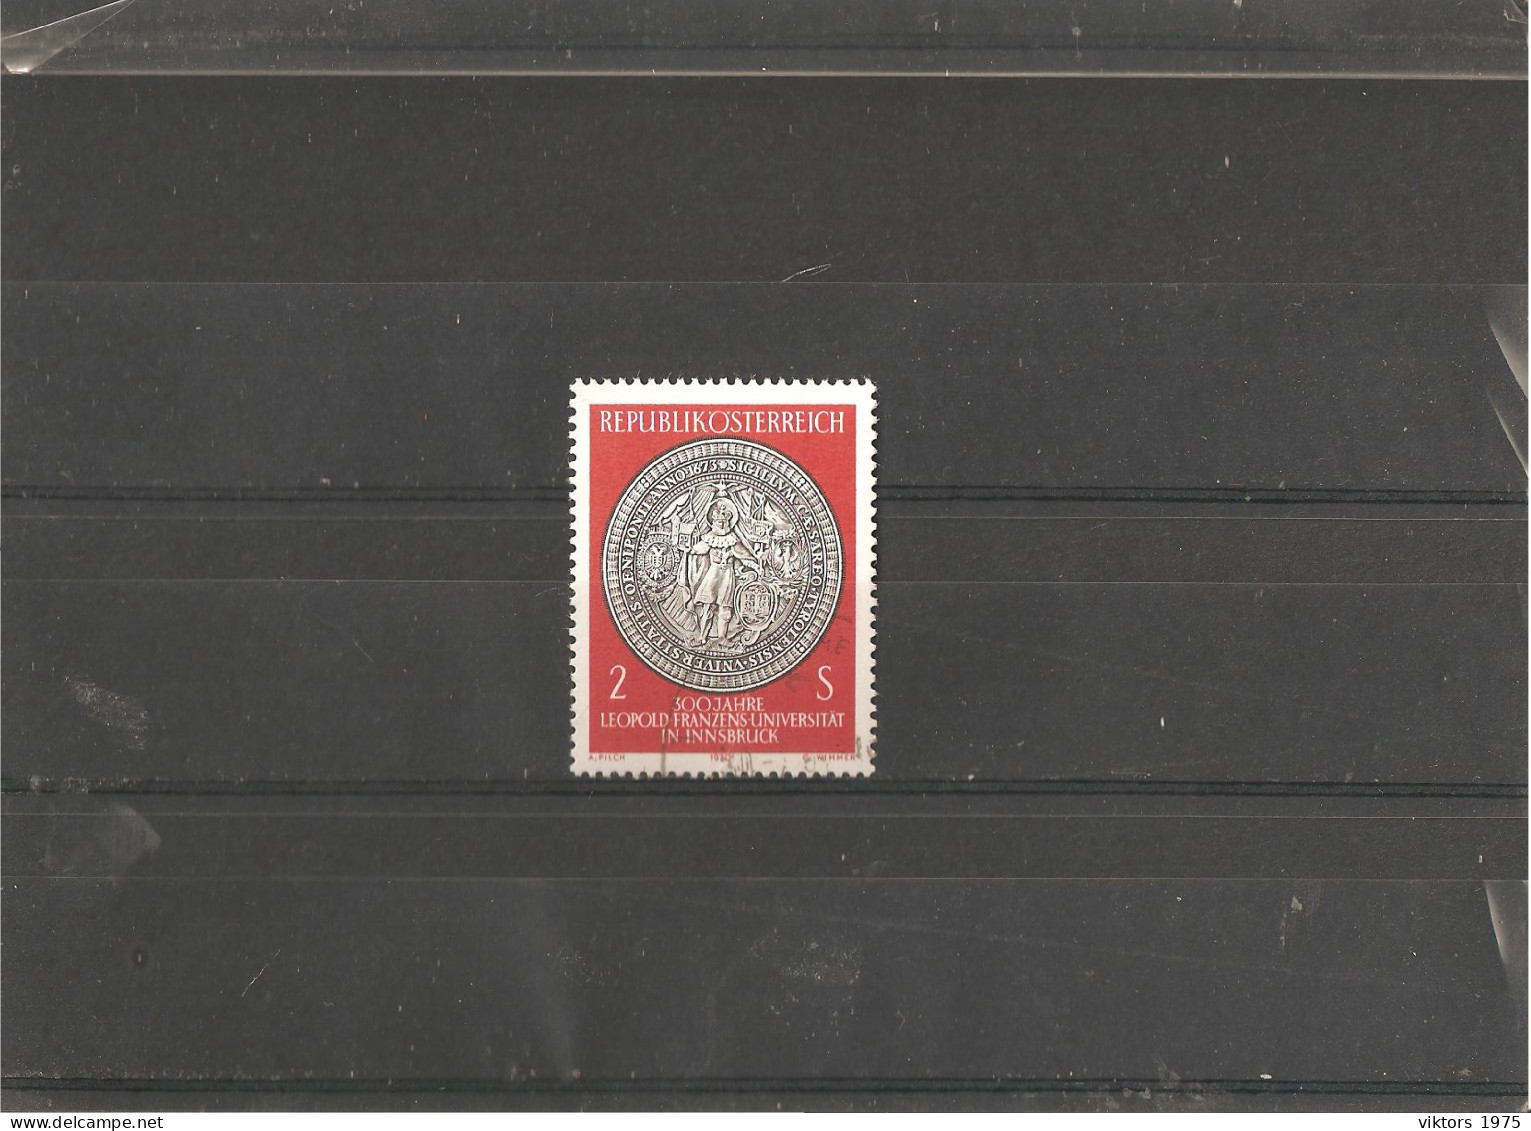 Used Stamp Nr.1326 In MICHEL Catalog - Used Stamps